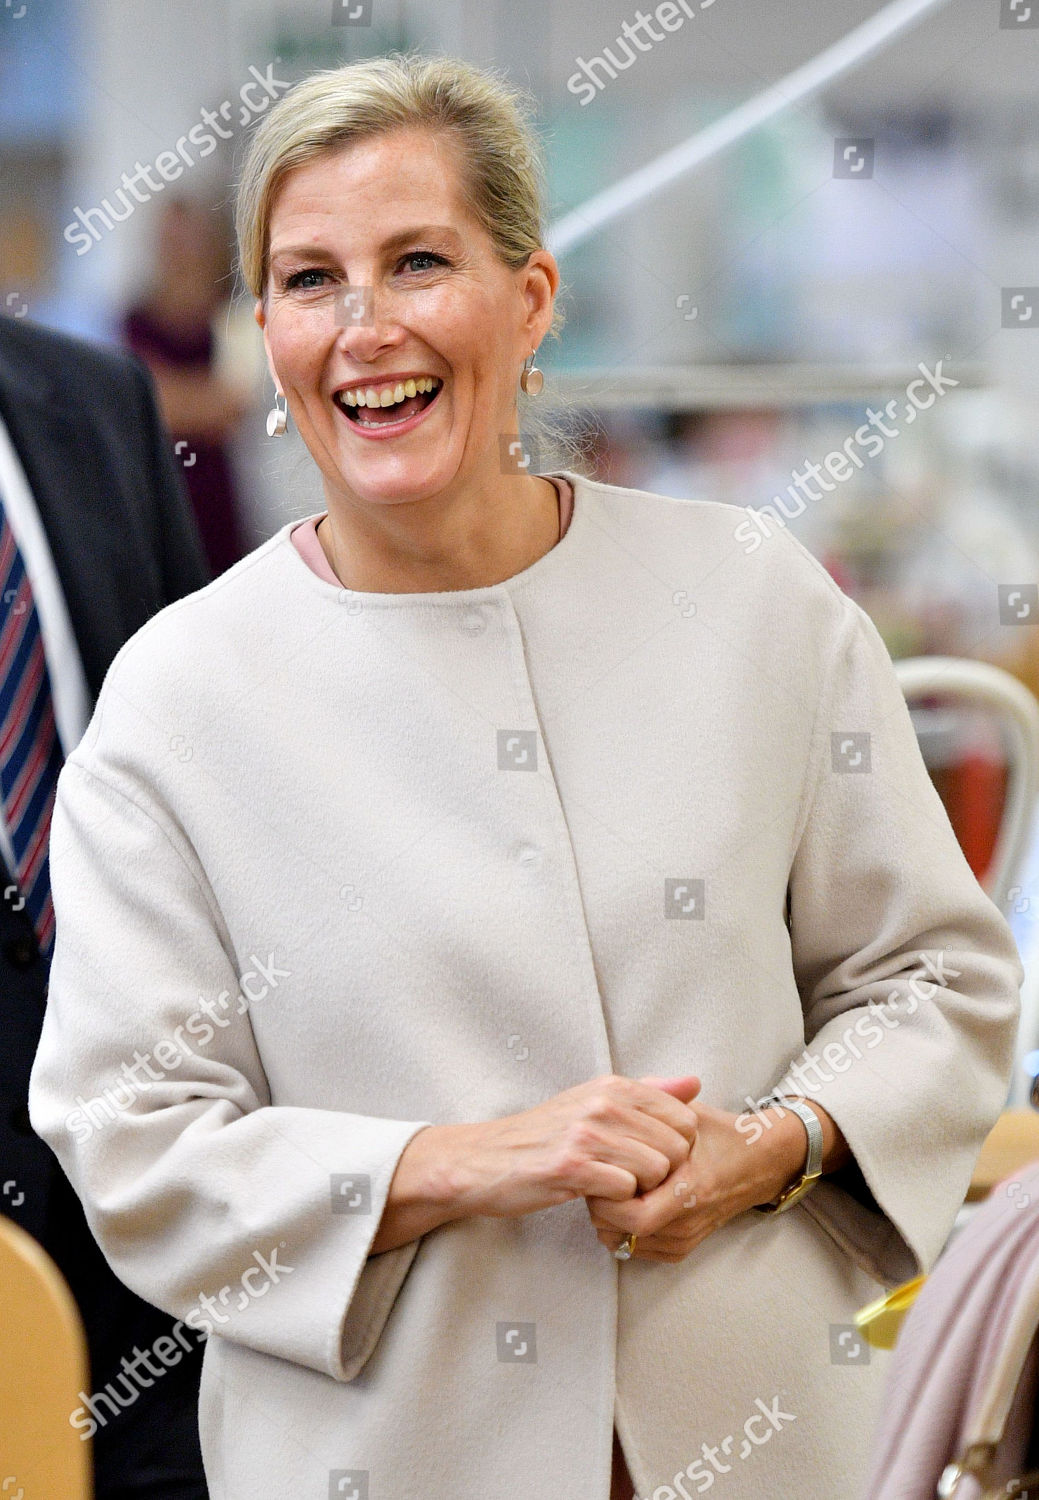 sophie-countess-of-wessex-visit-to-alfreton-uk-shutterstock-editorial-9988163ae.jpg